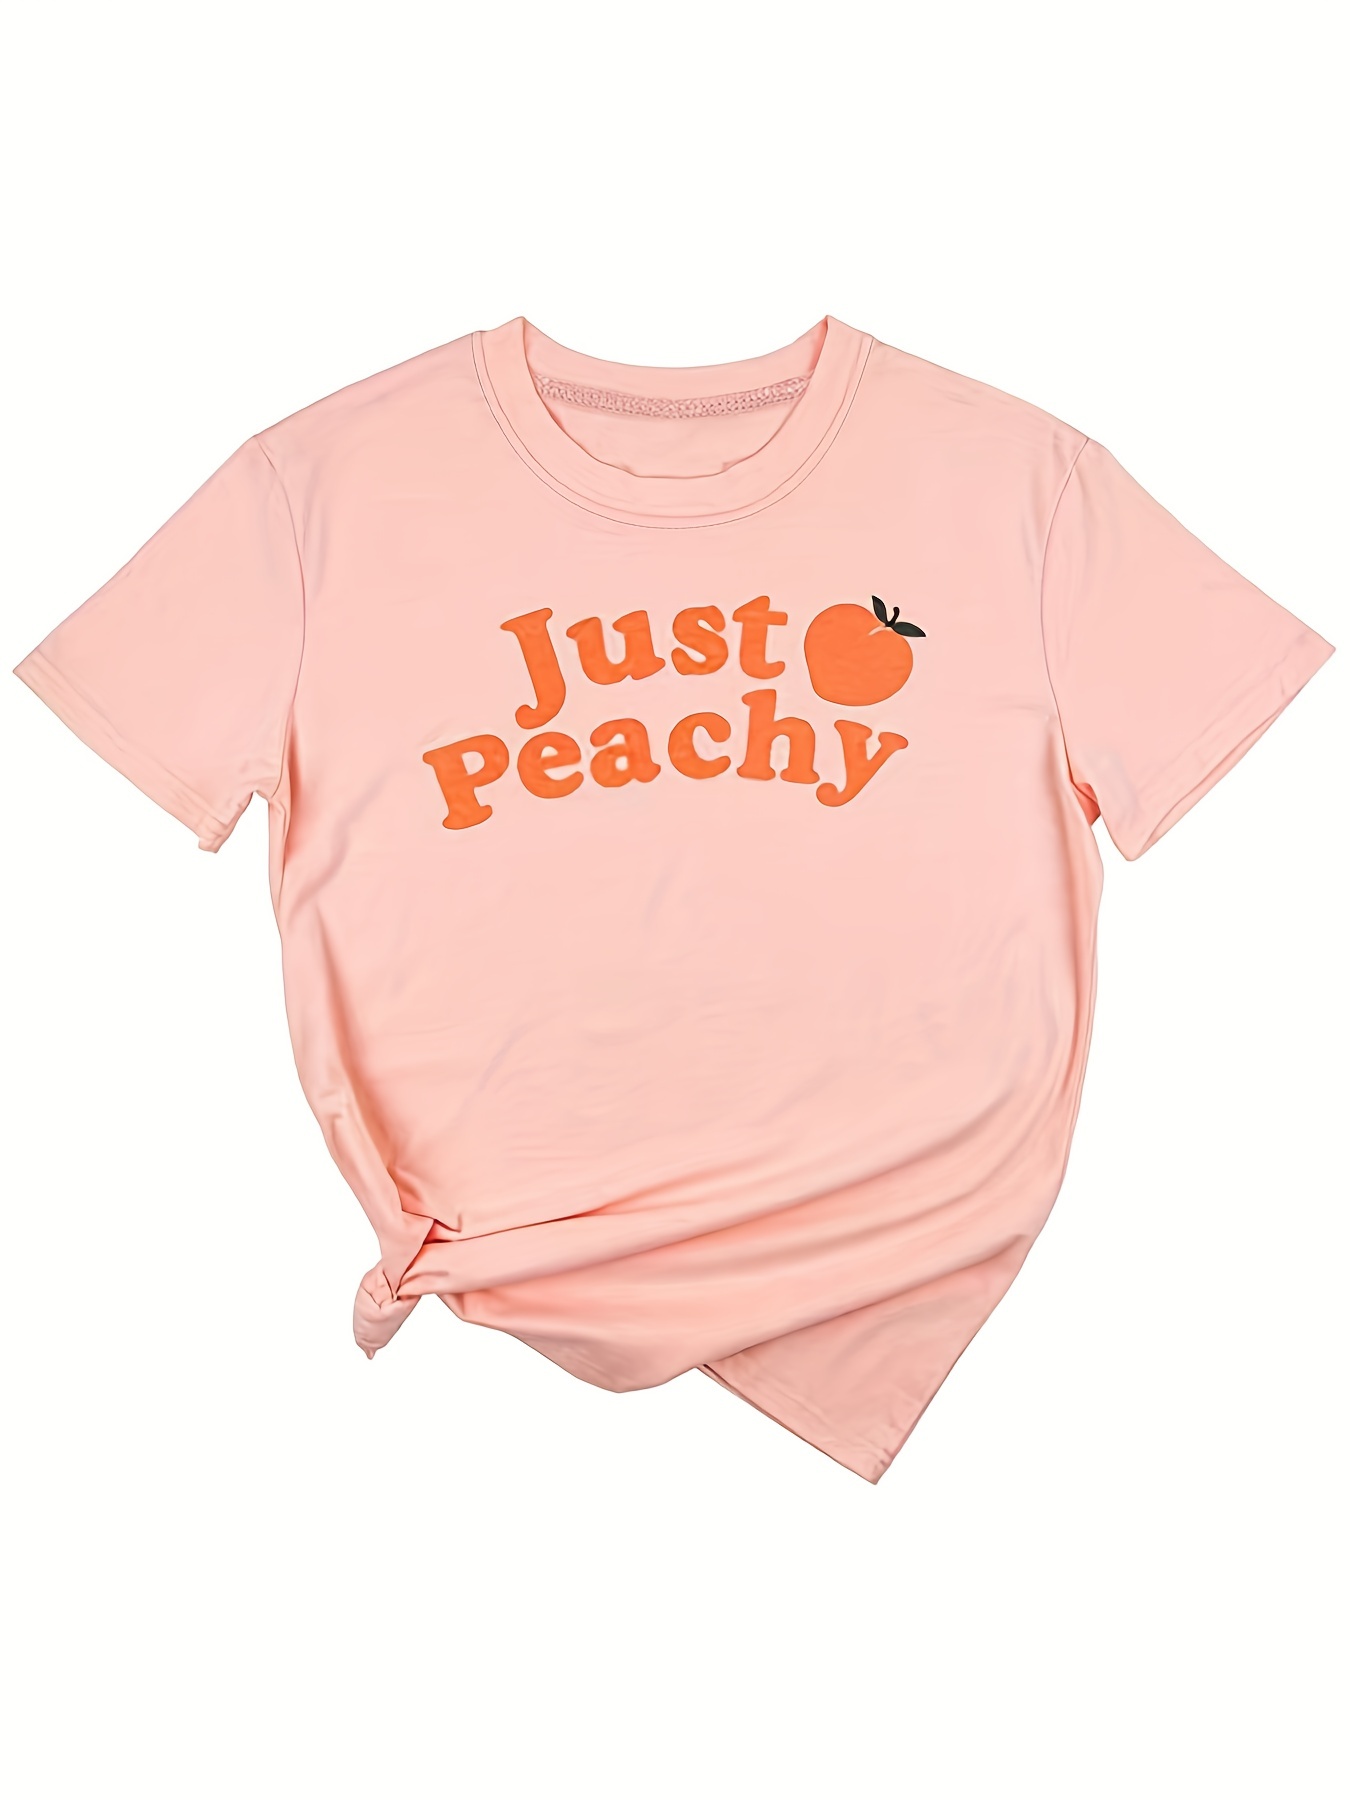 Just Peachy – Peach Fit Clothing